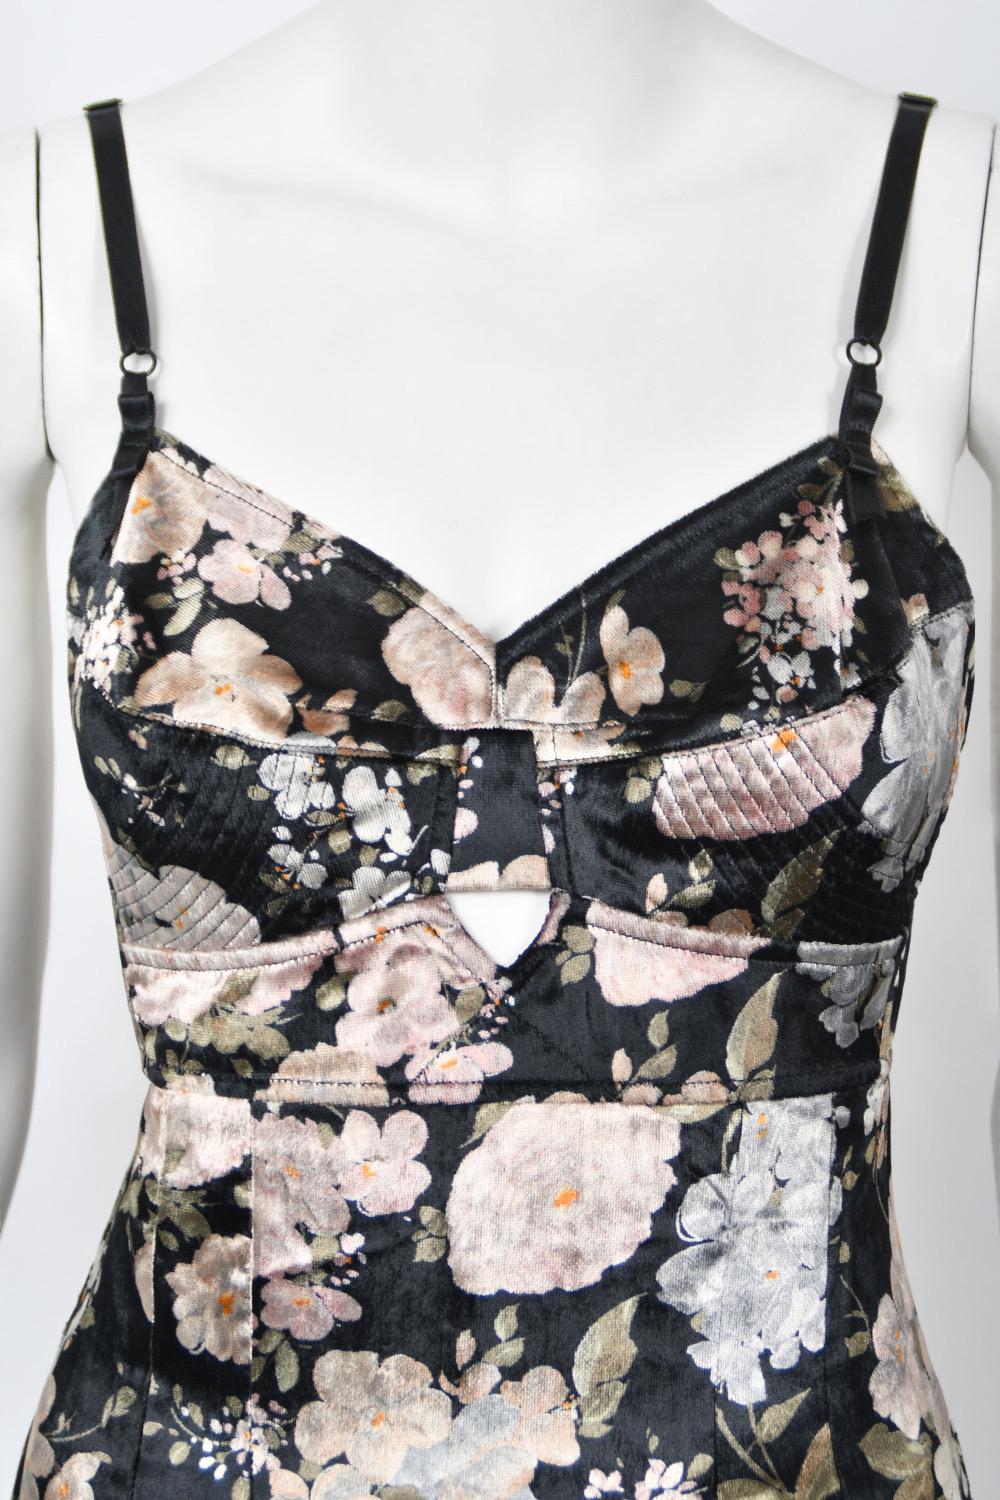 1997 Dolce & Gabbana Floral Stretch Velvet Cut-Out Bustier Slip Dress with Tags  For Sale 3